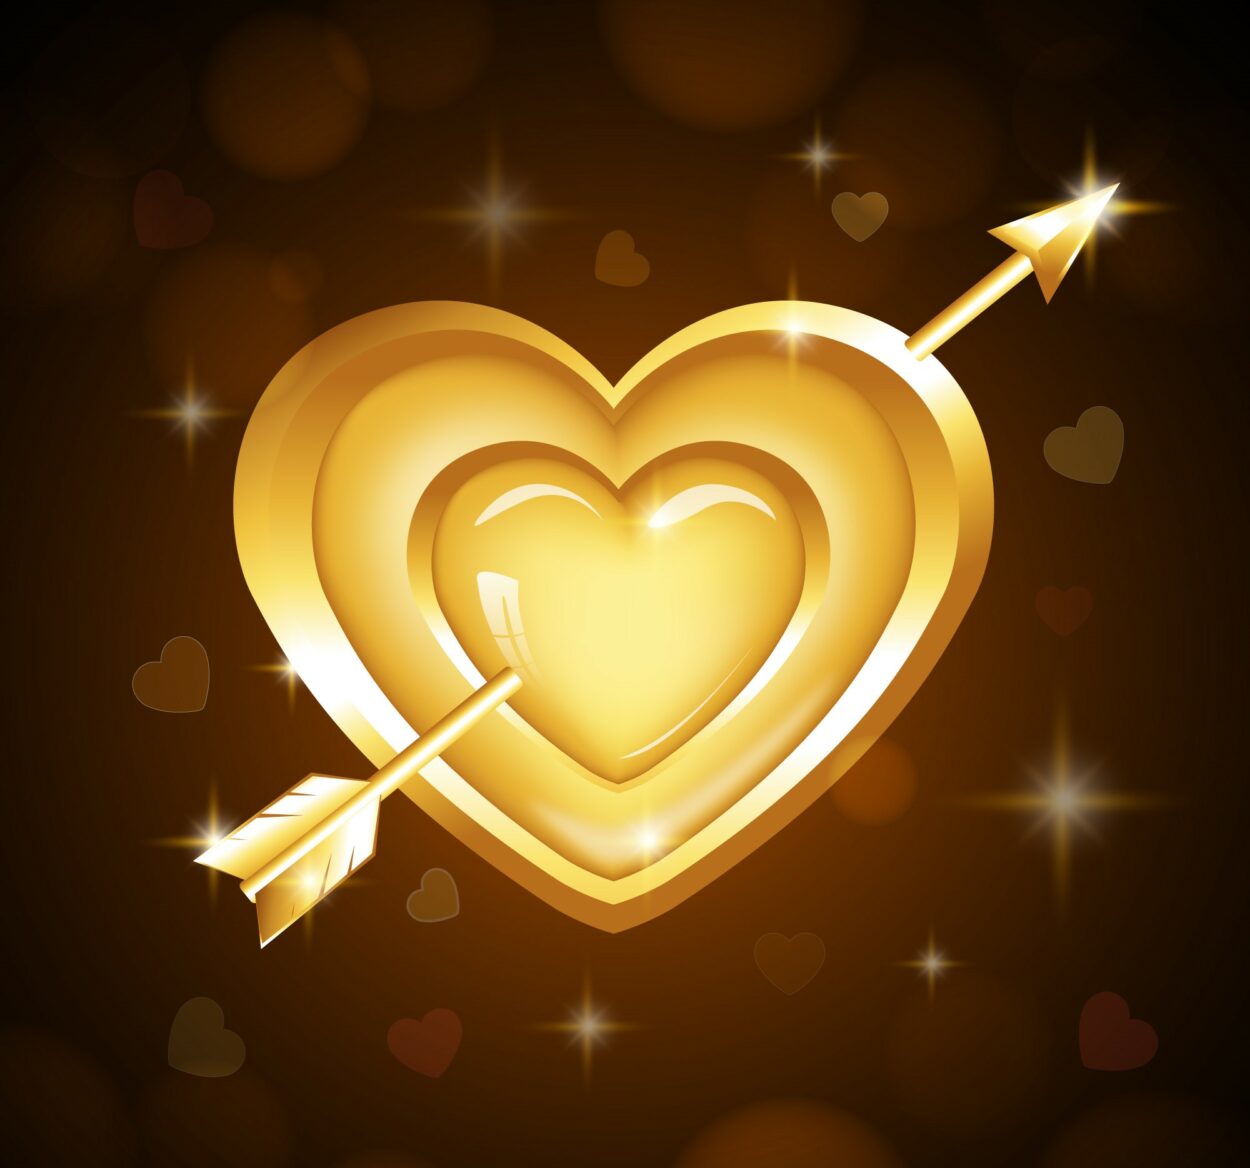 3D, golden heart and arrow with sparks and hearts in the background